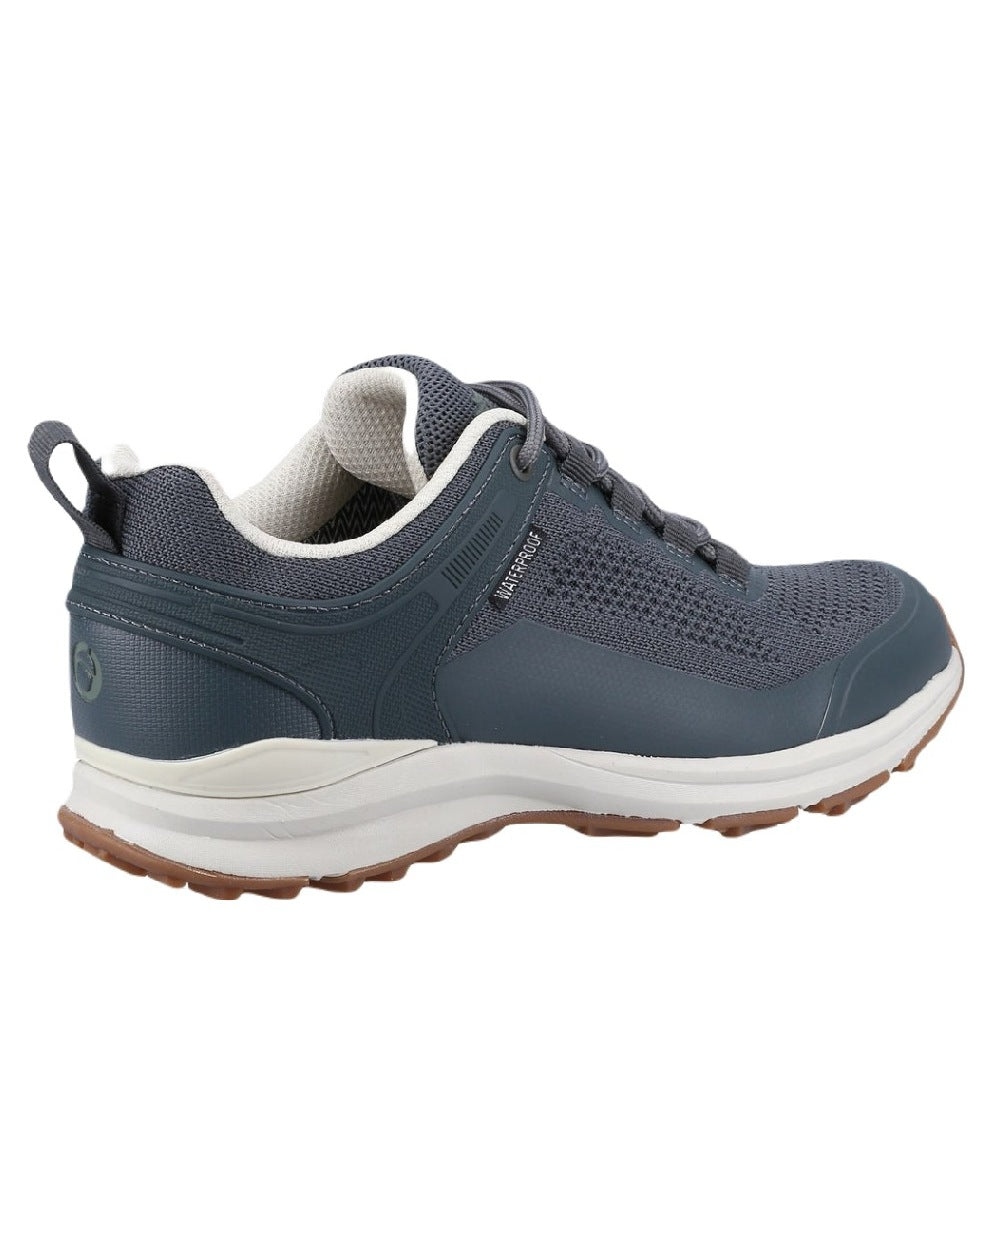 Grey coloured Cotswold Compton Womens Hiking Shoes on white background 